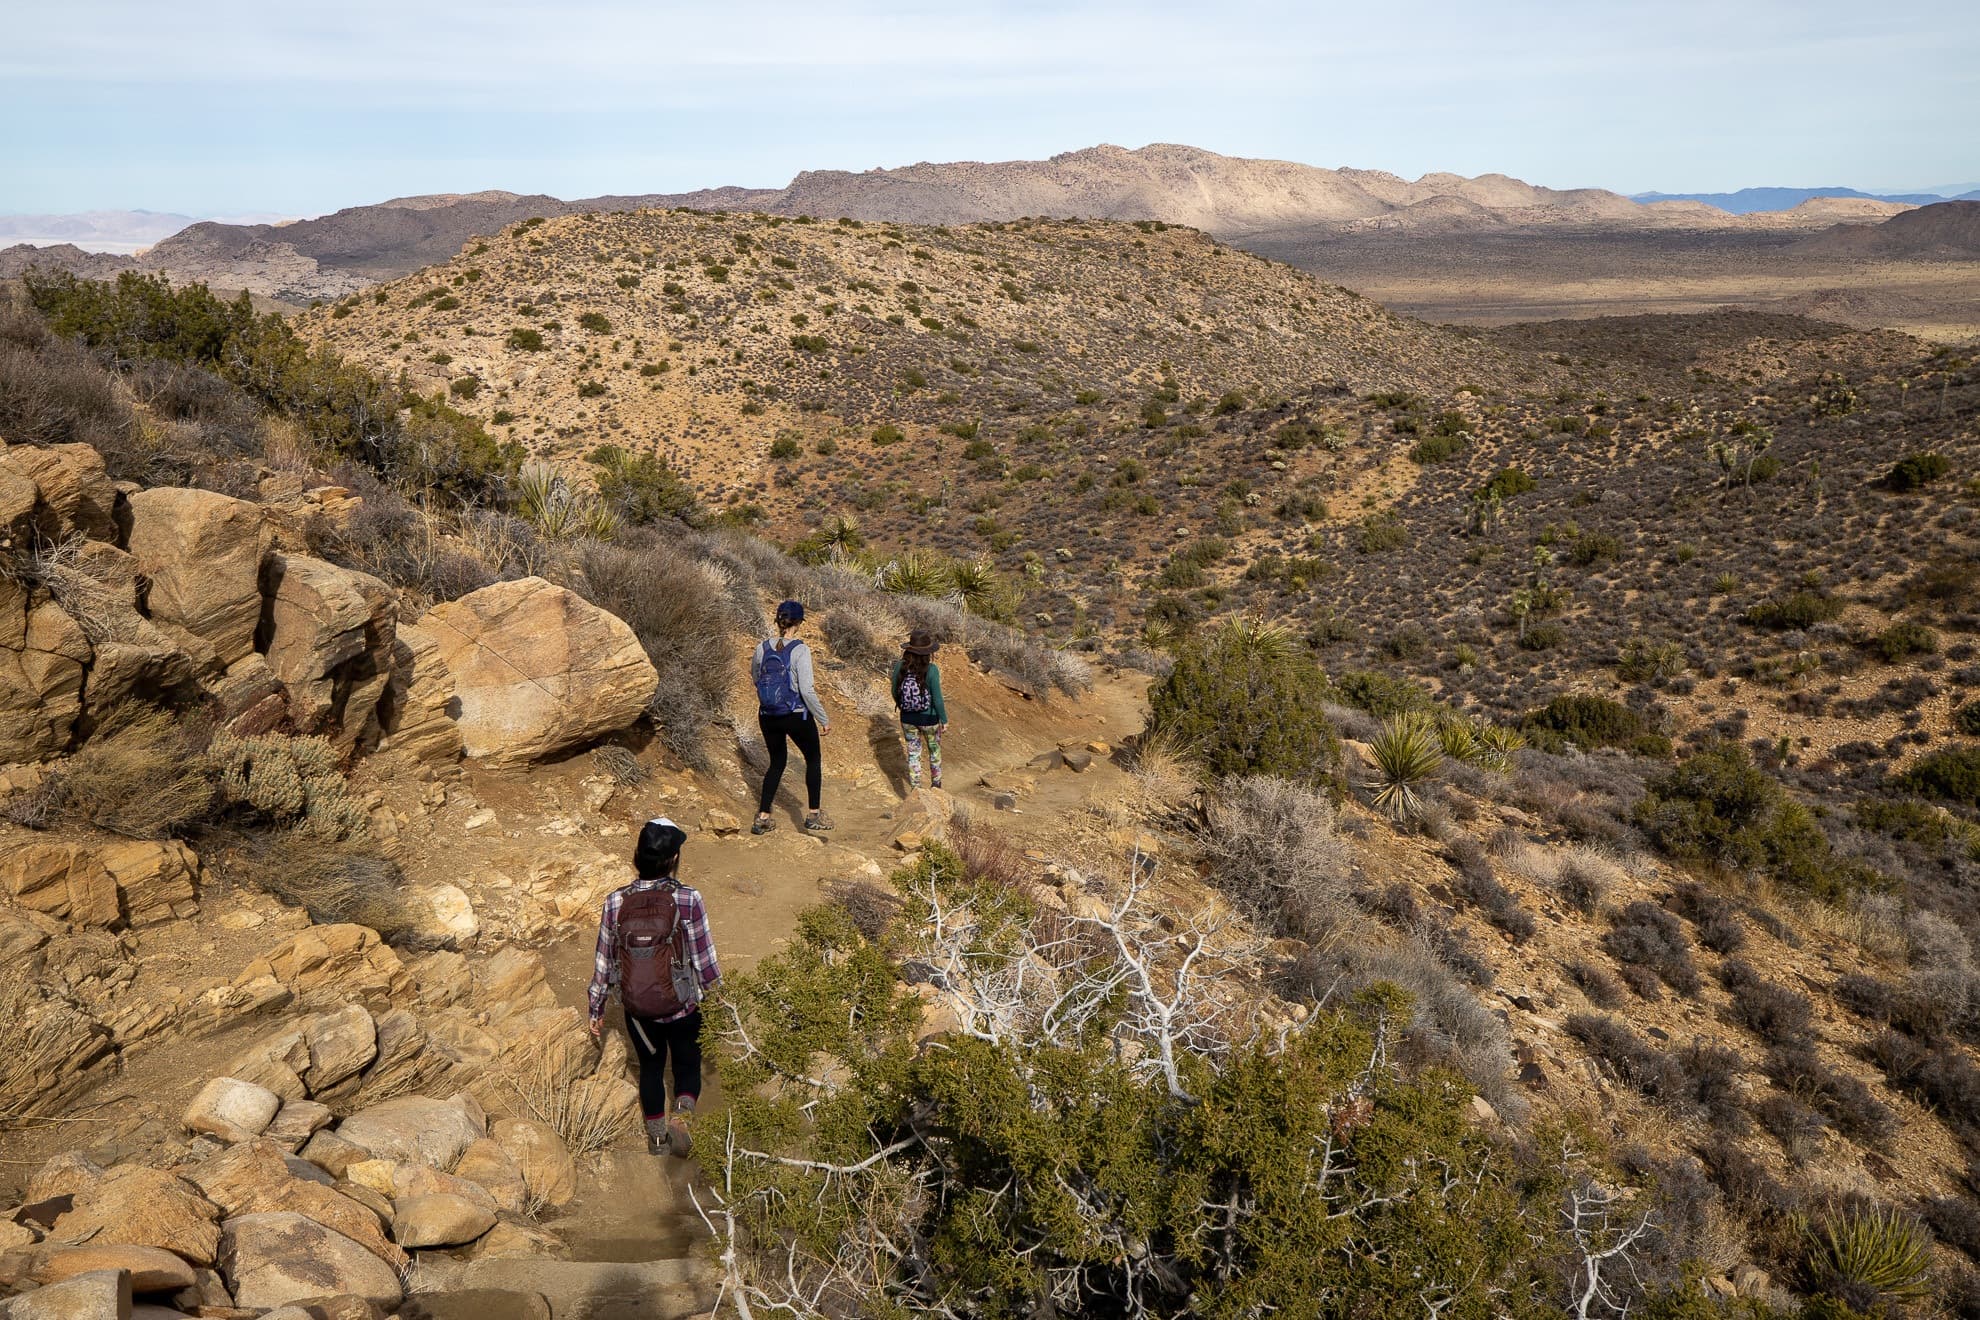 Trail Etiquette 101: The Basic Rules of Hiking